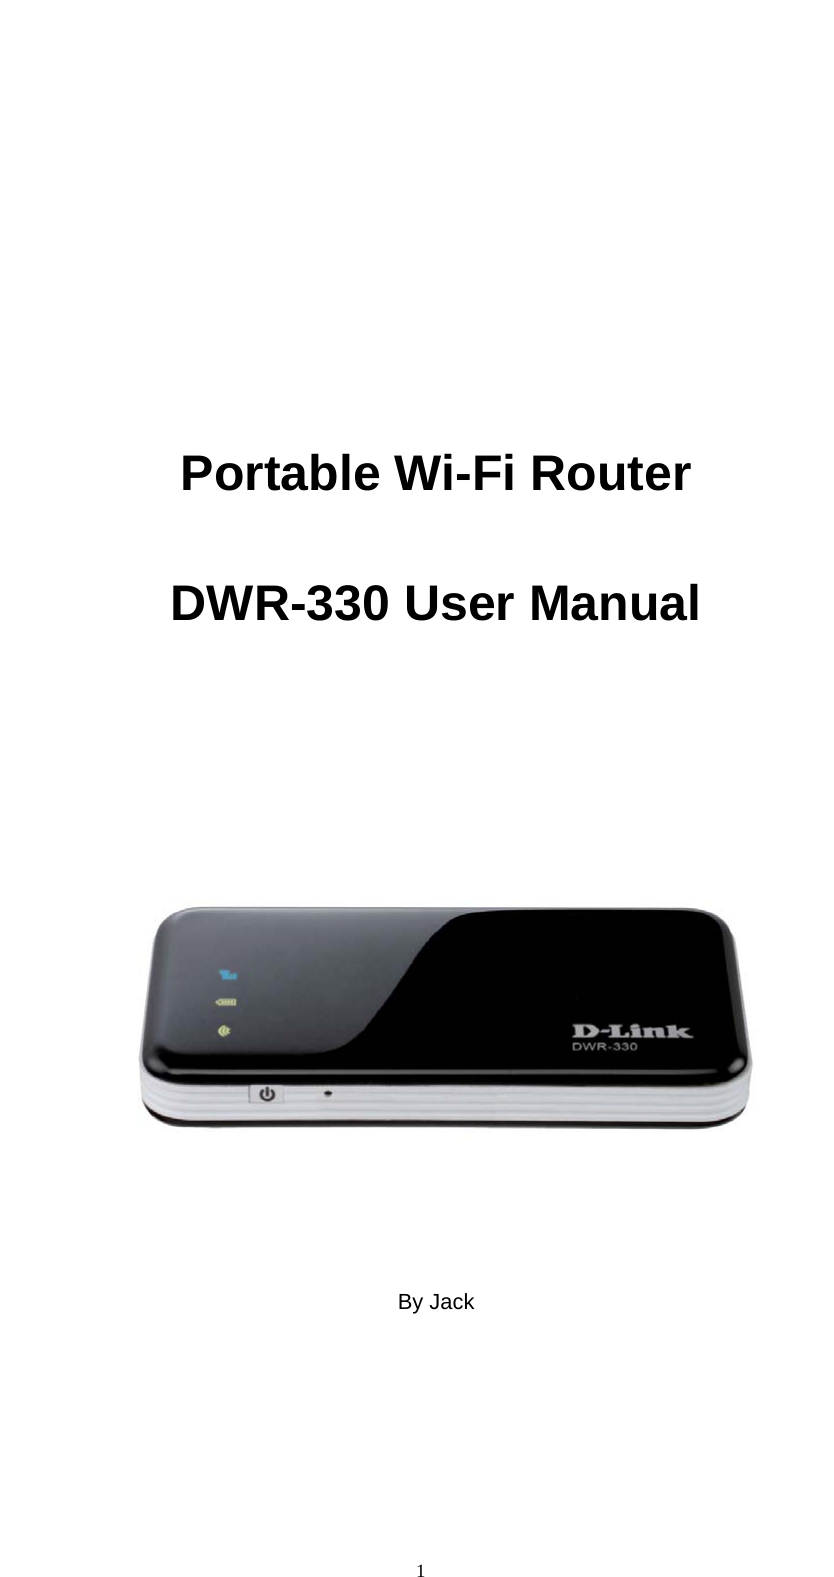   1         Portable Wi-Fi Router  DWR-330 User Manual              By Jack      